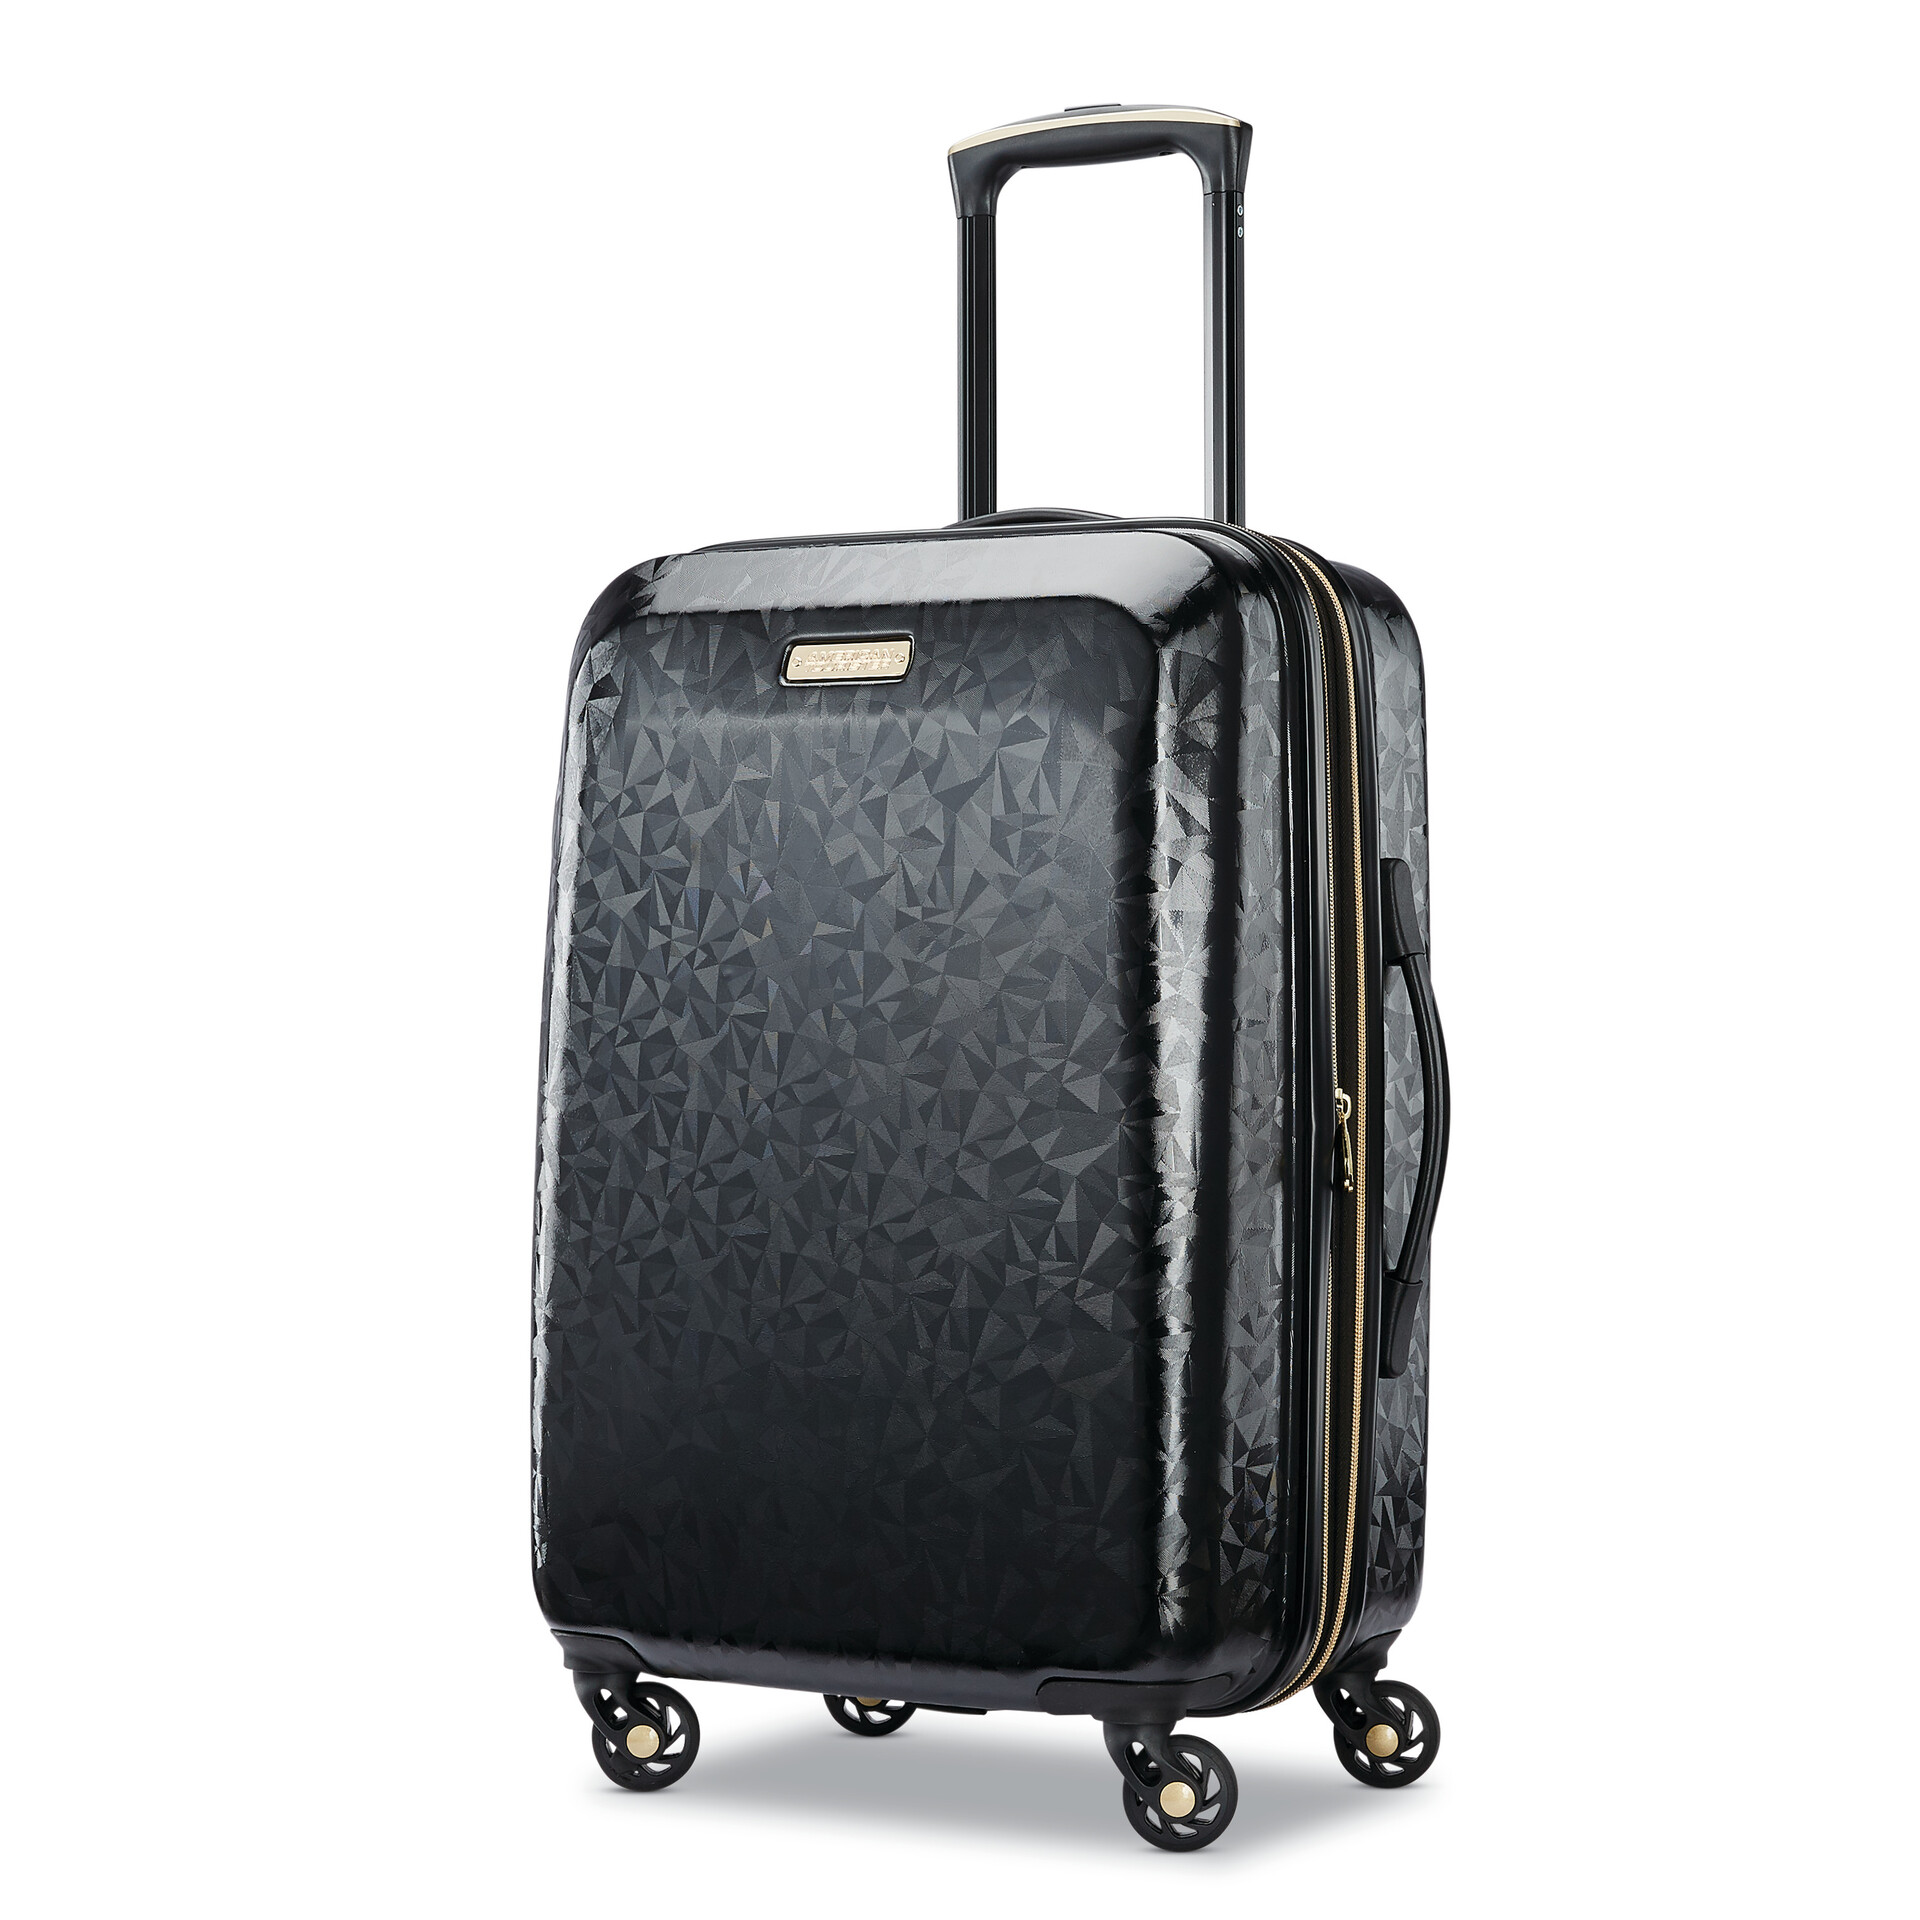 American Tourister 1920s Vintage Luggage